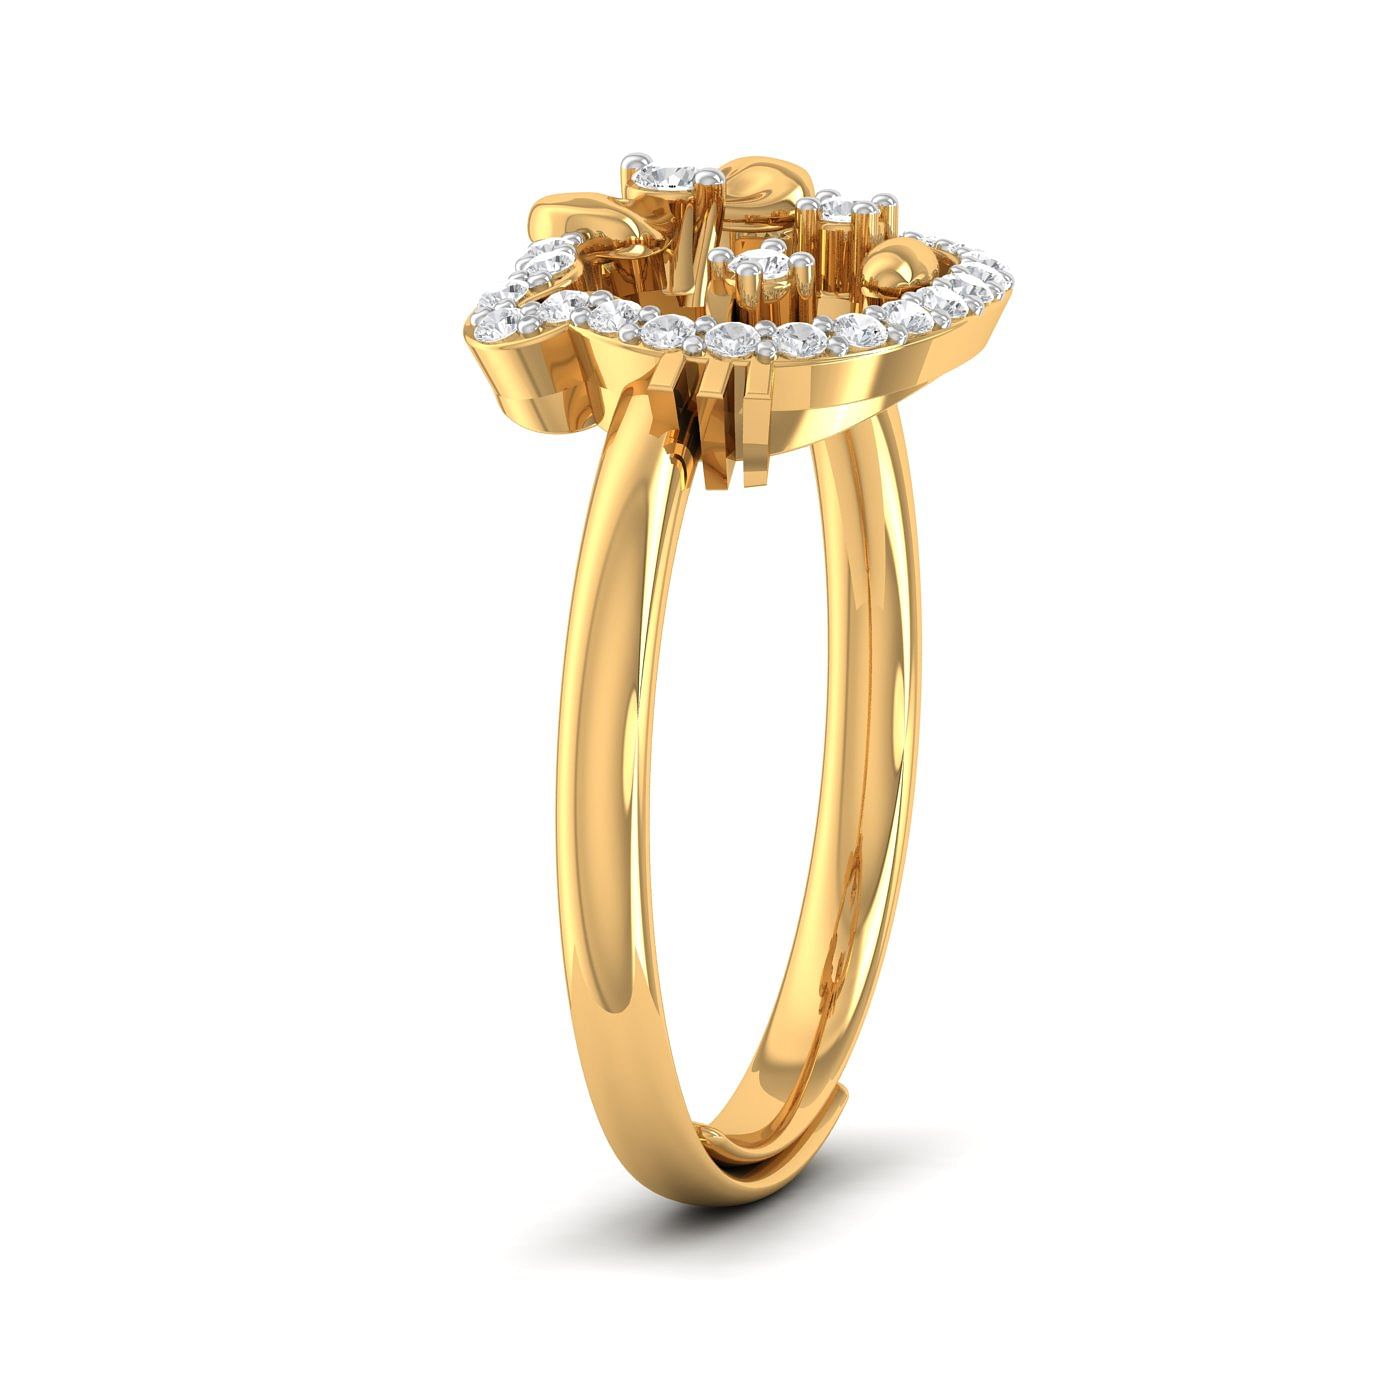 Stylish Modern Fancy Classic Diamond Ring With Yellow Gold For Gift